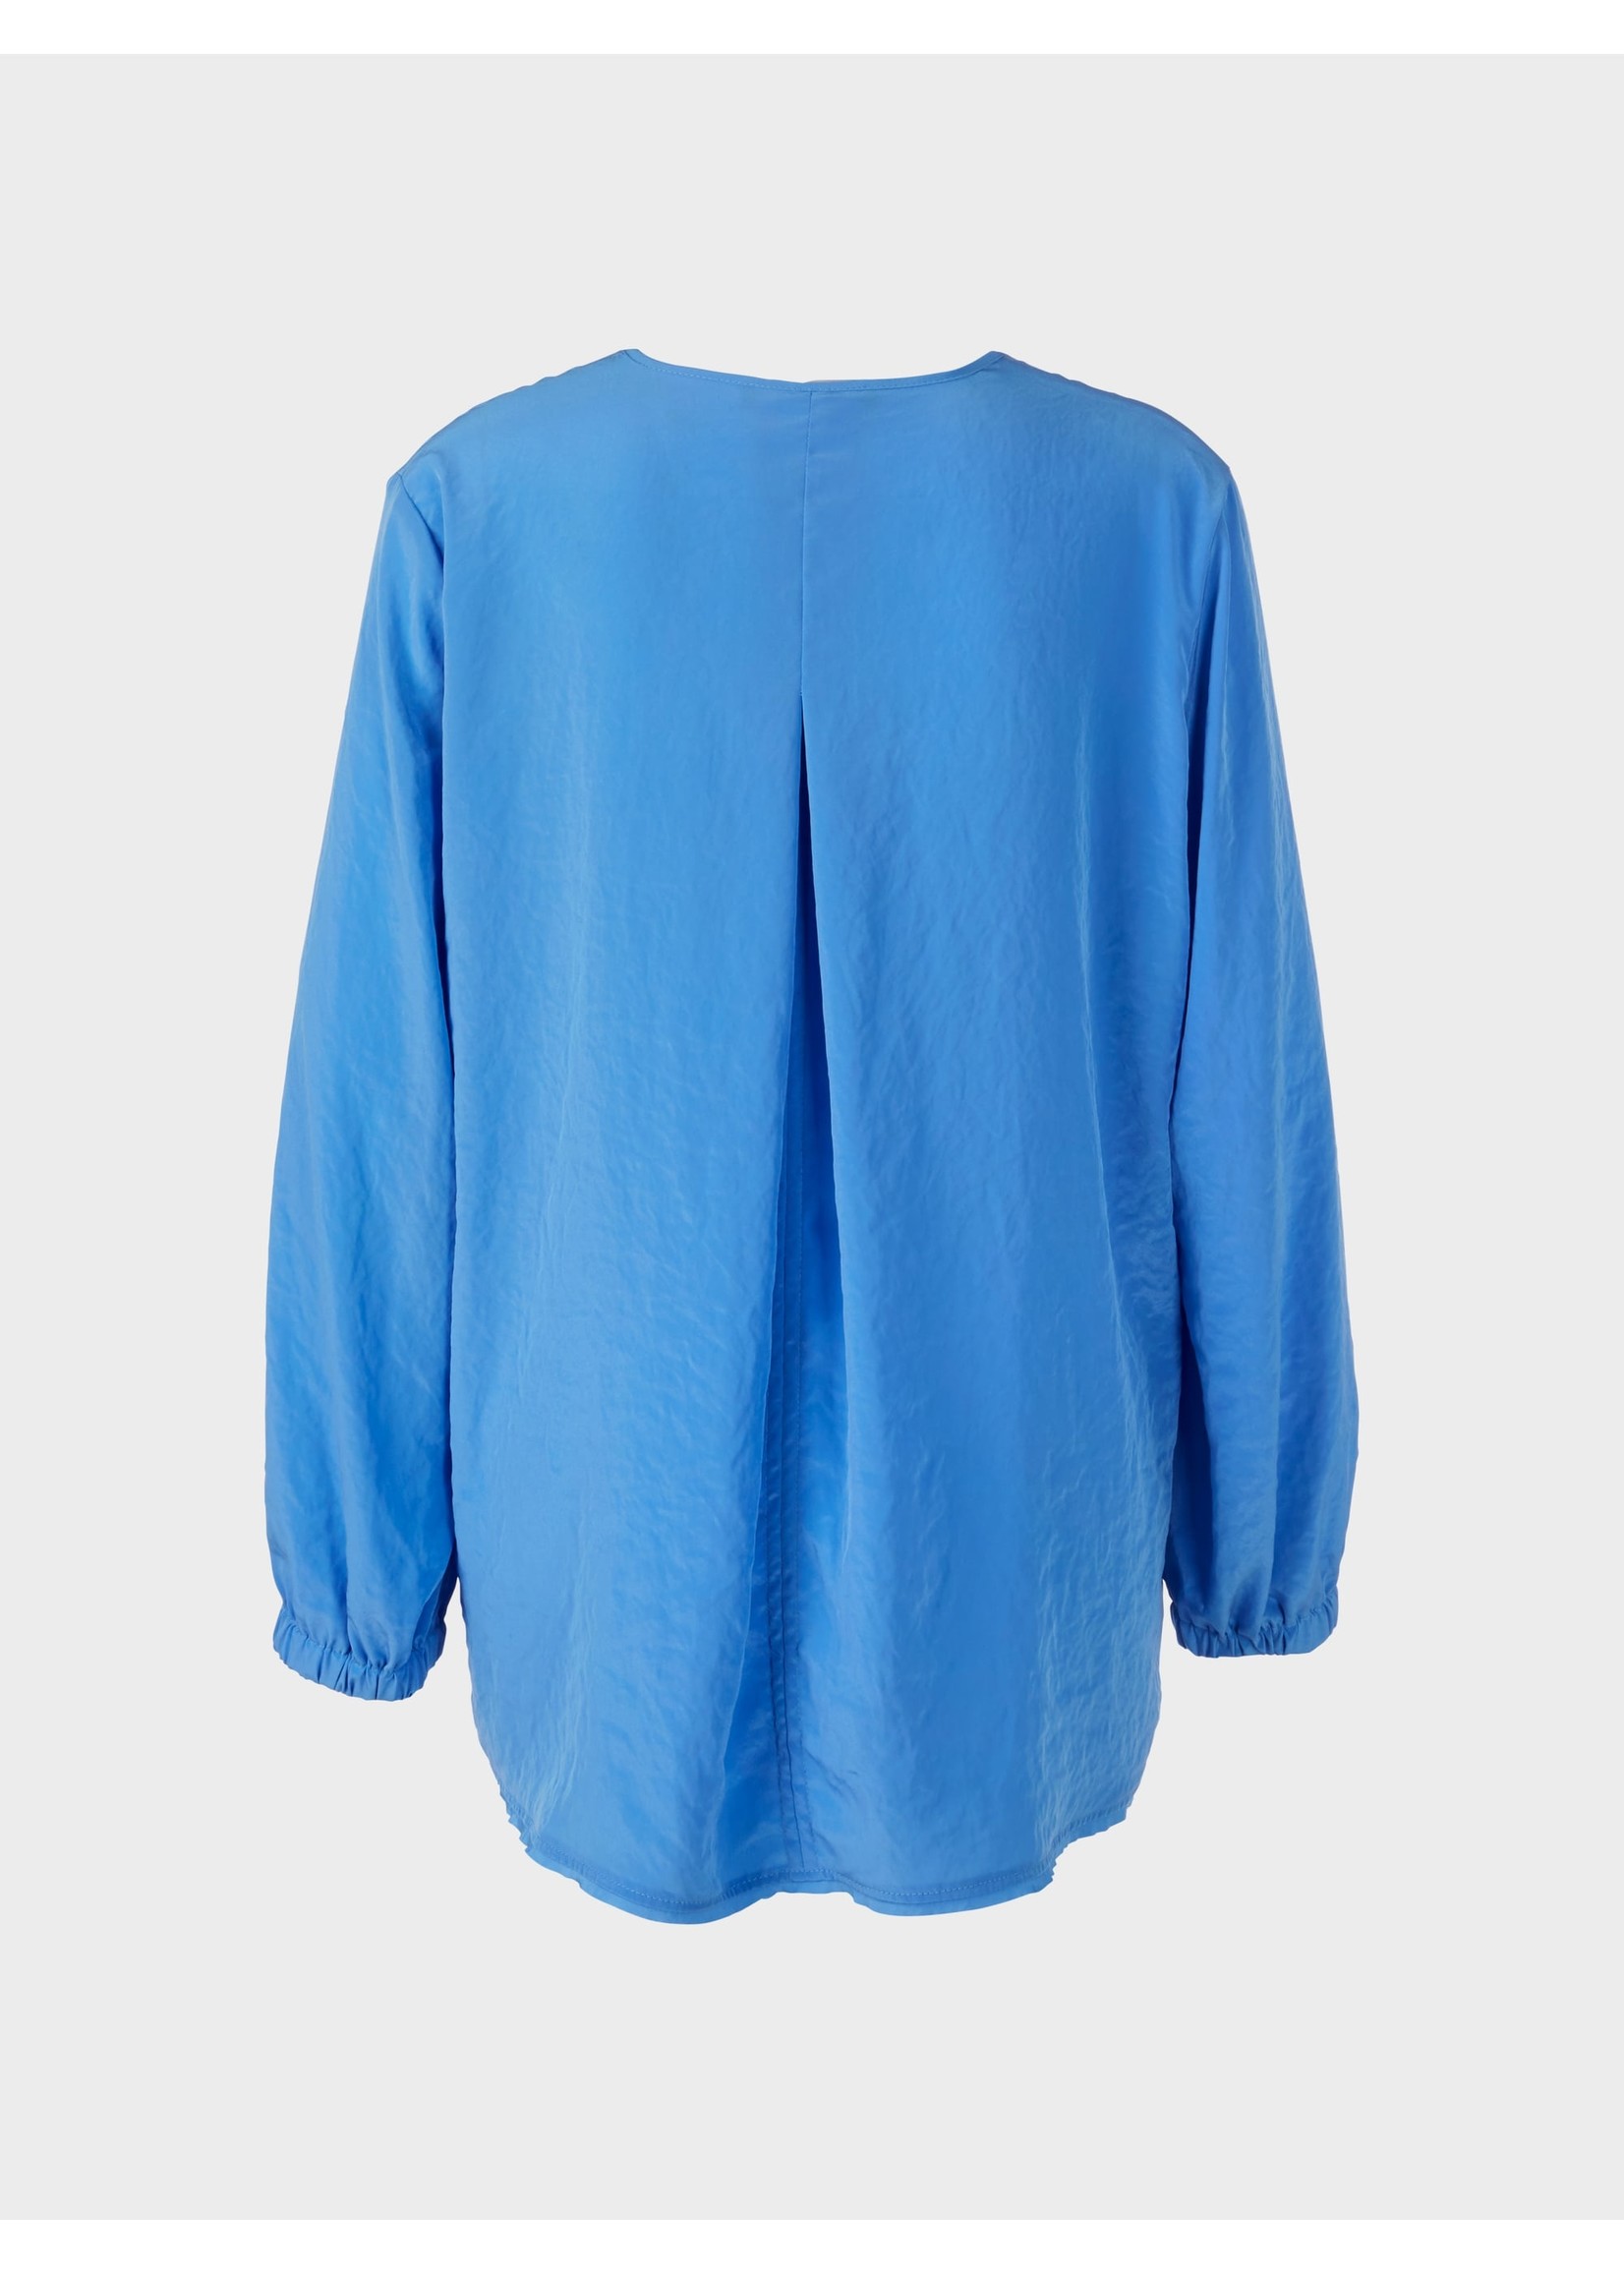 Marccain Sports Blouse  US 55.04 W76 360